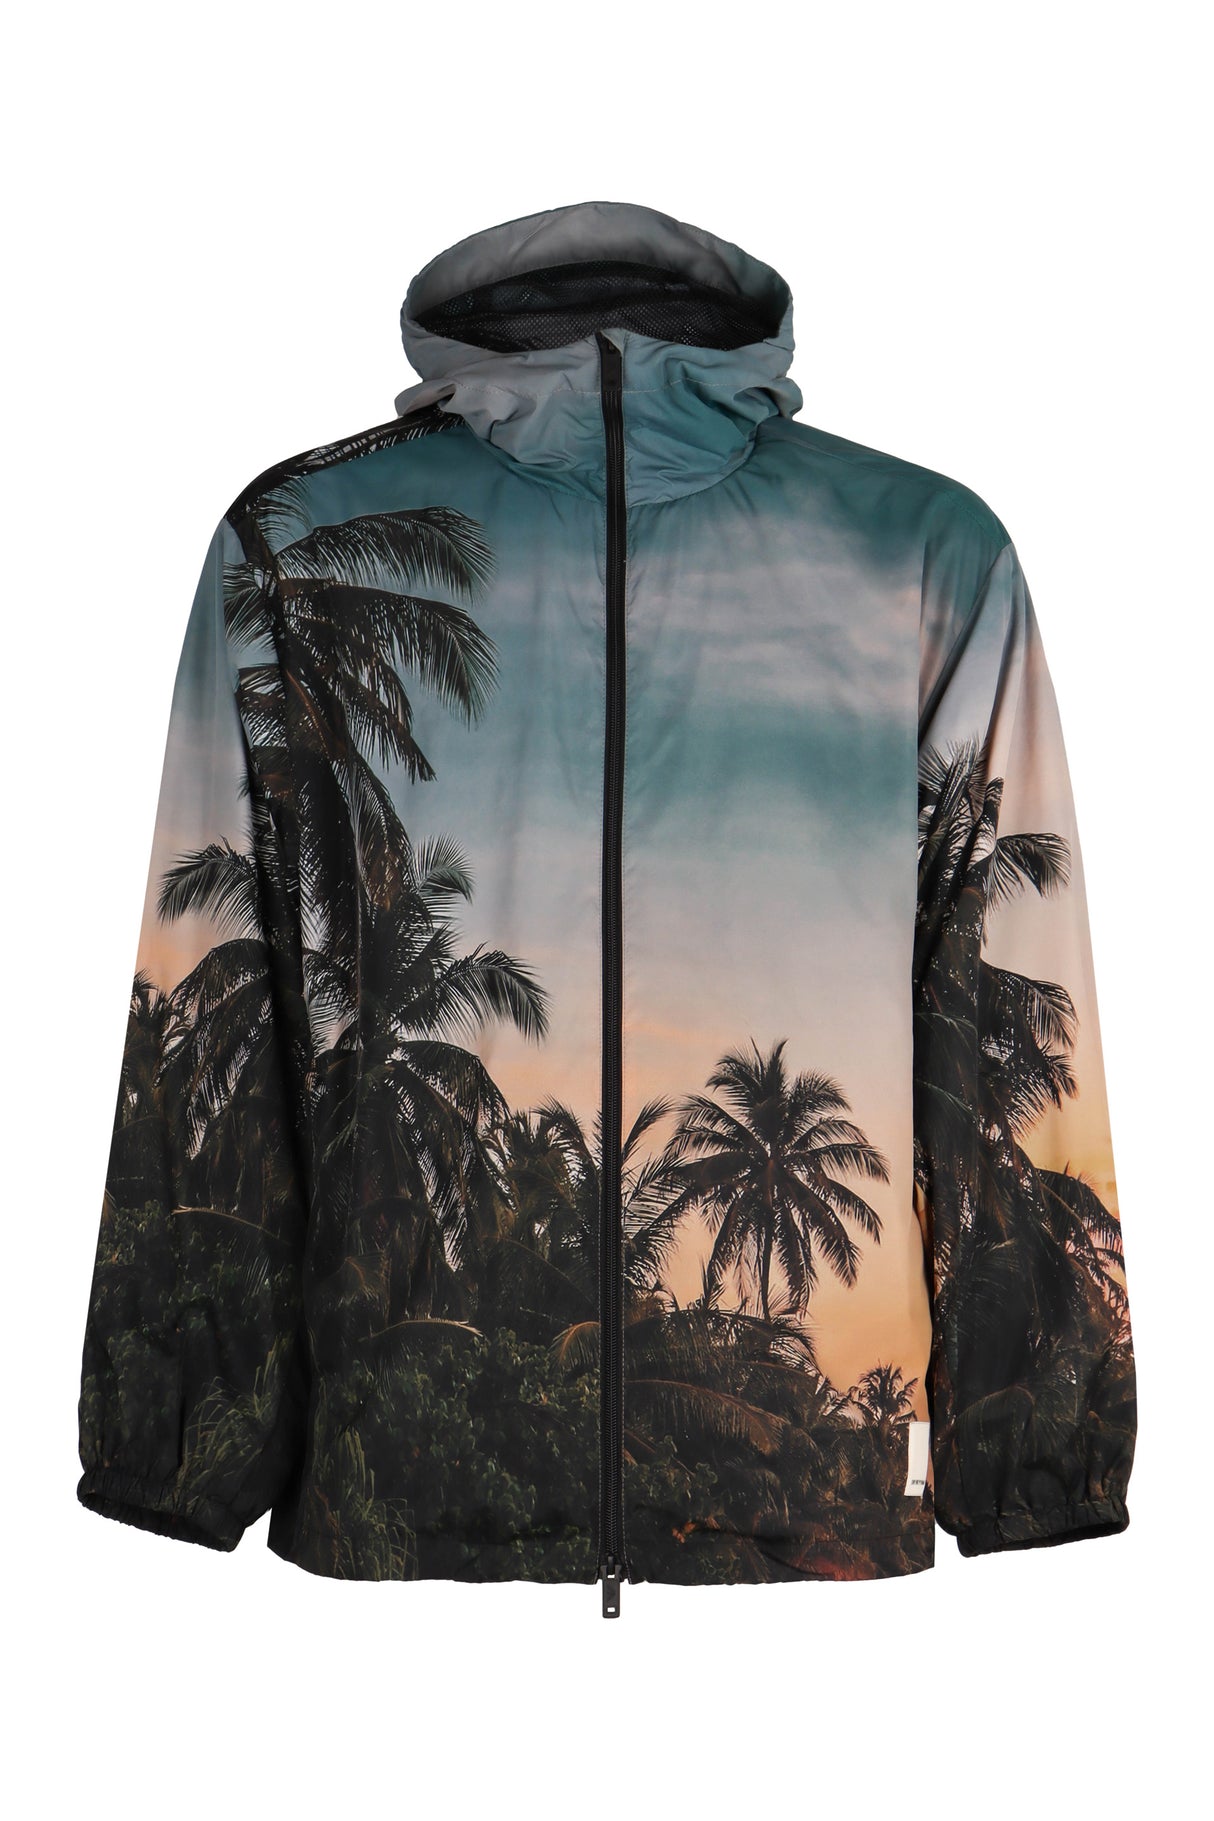 EMPORIO ARMANI Men's Nylon Jacket with All Over Print and Adjustable Drawstring Hem - SS24 Collection